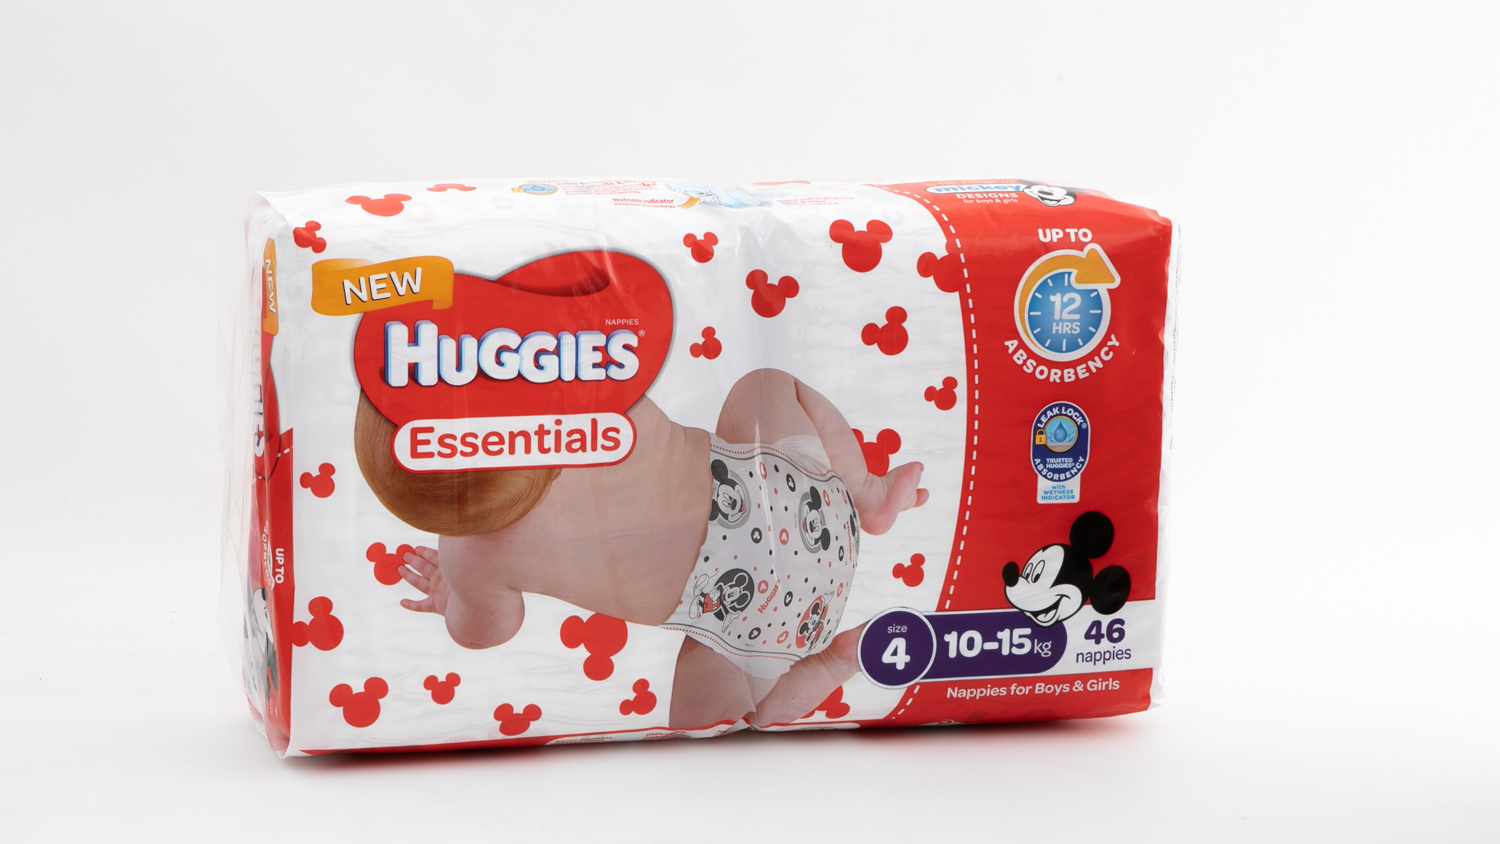 Huggies Essentials Size 4 Nappies carousel image